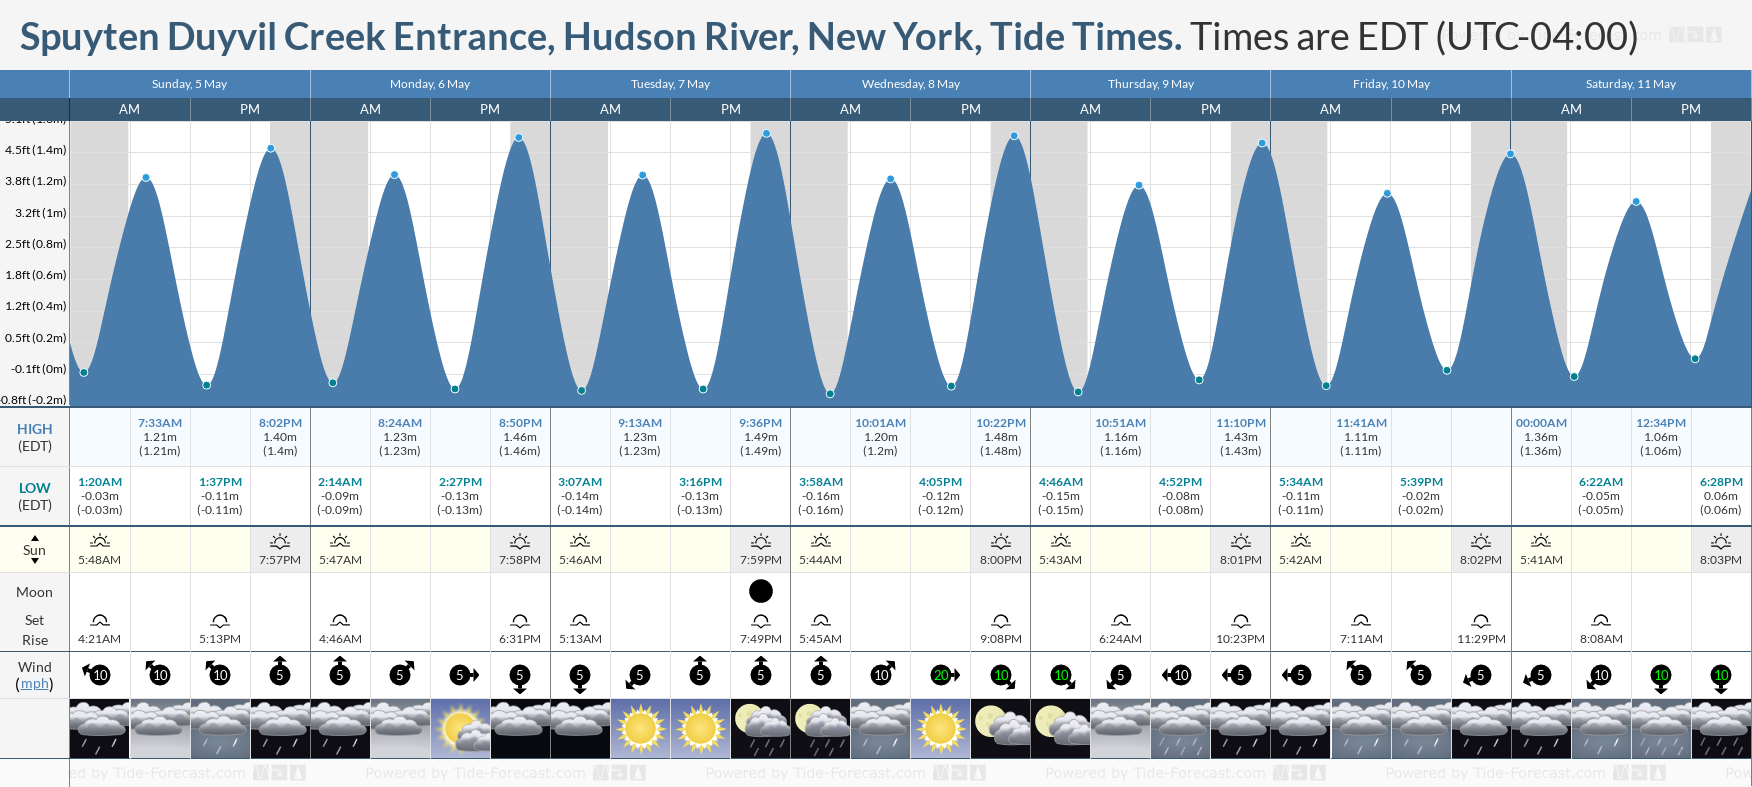 Spuyten Duyvil Creek Entrance, Hudson River, New York Tide Chart including high and low tide tide times for the next 7 days